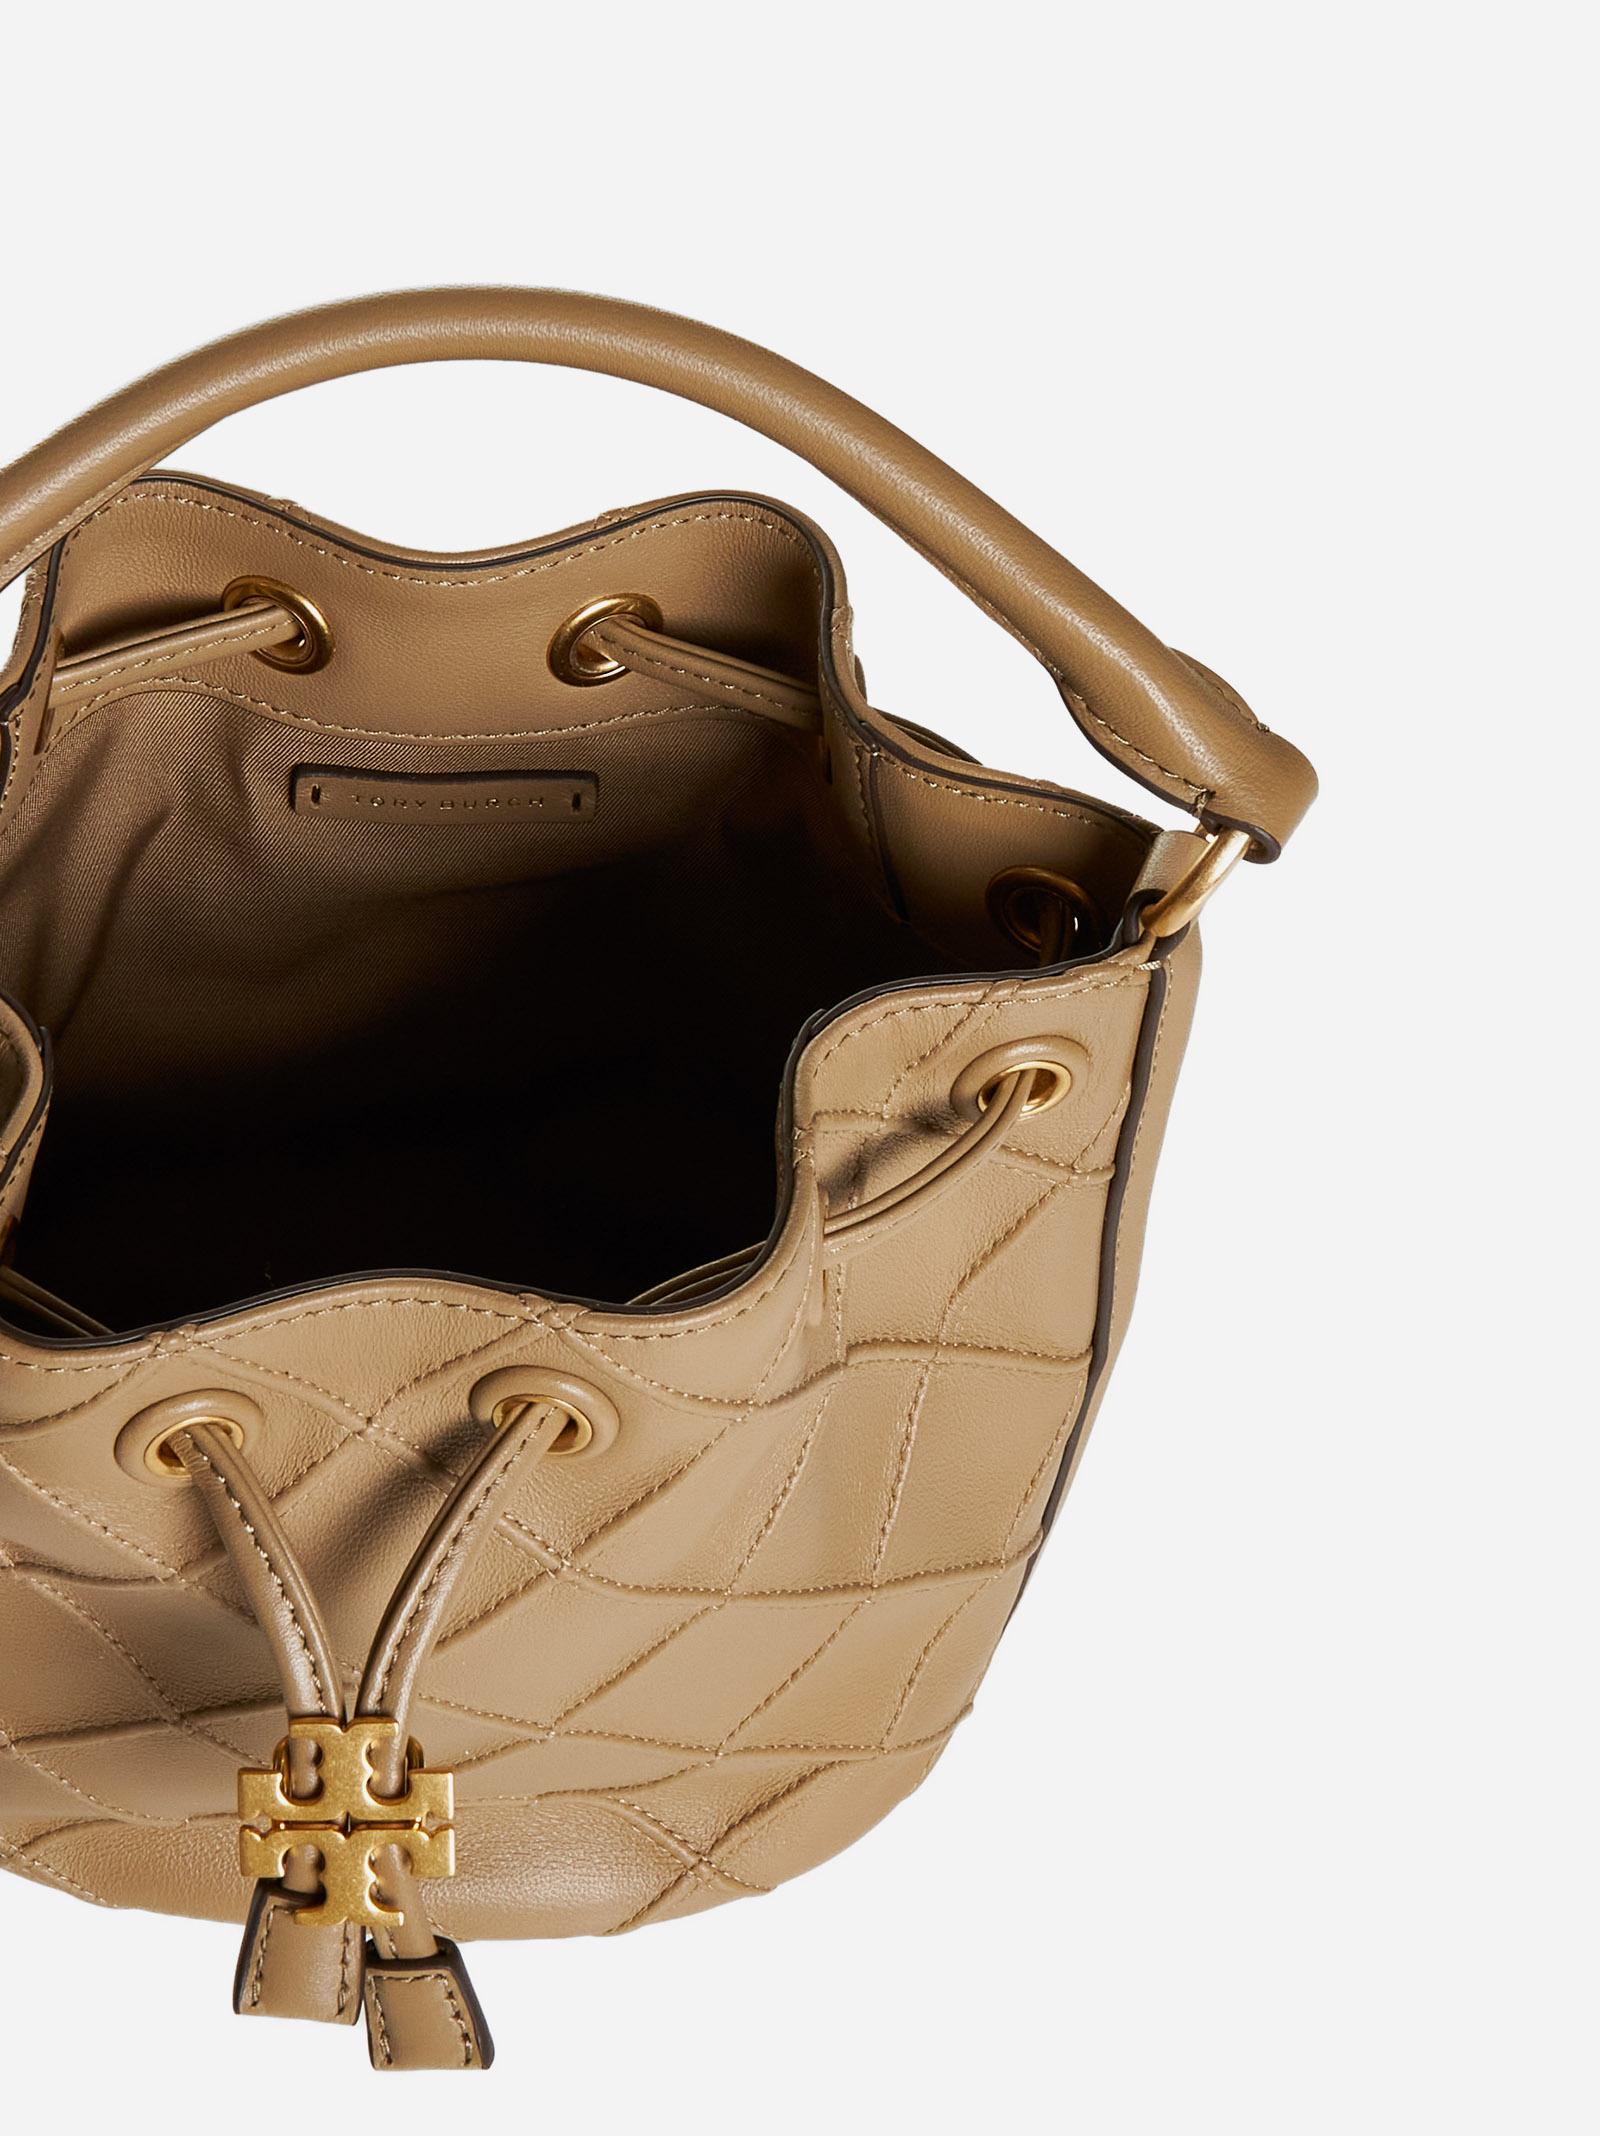 Tory Burch Fleming Leather Bucket Bag in Natural